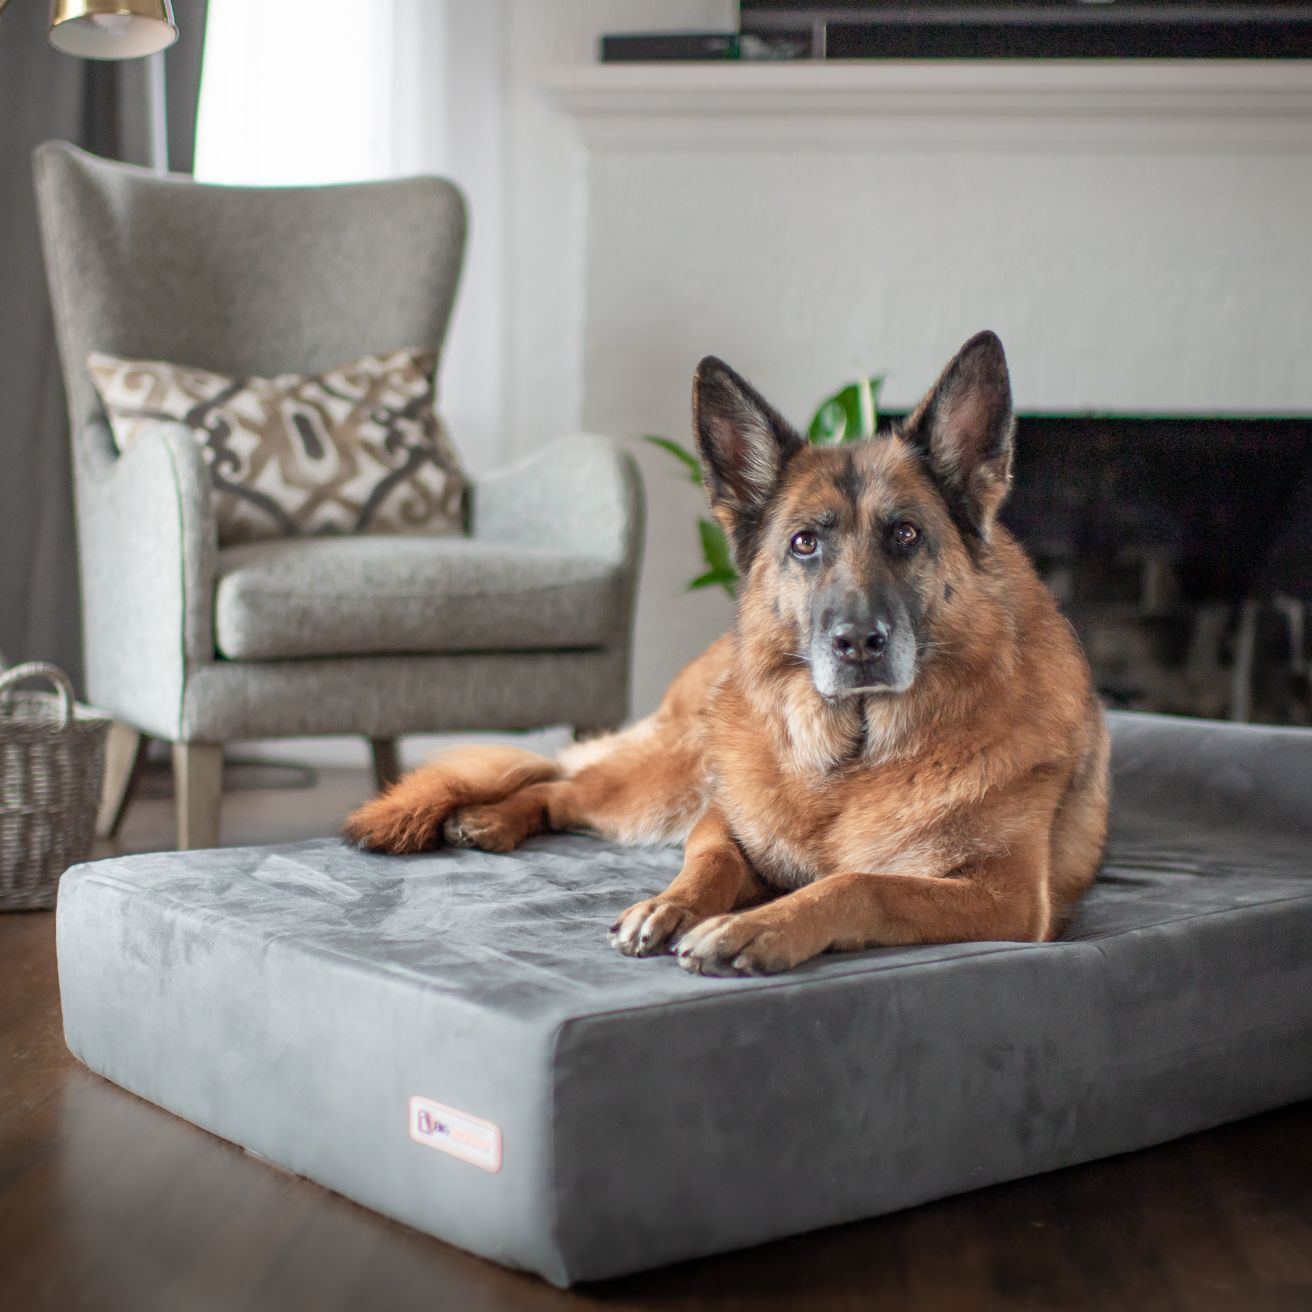 German shepherd laying on a grey Big Barker bed, placed in a living room with a chair and fireplace in the background